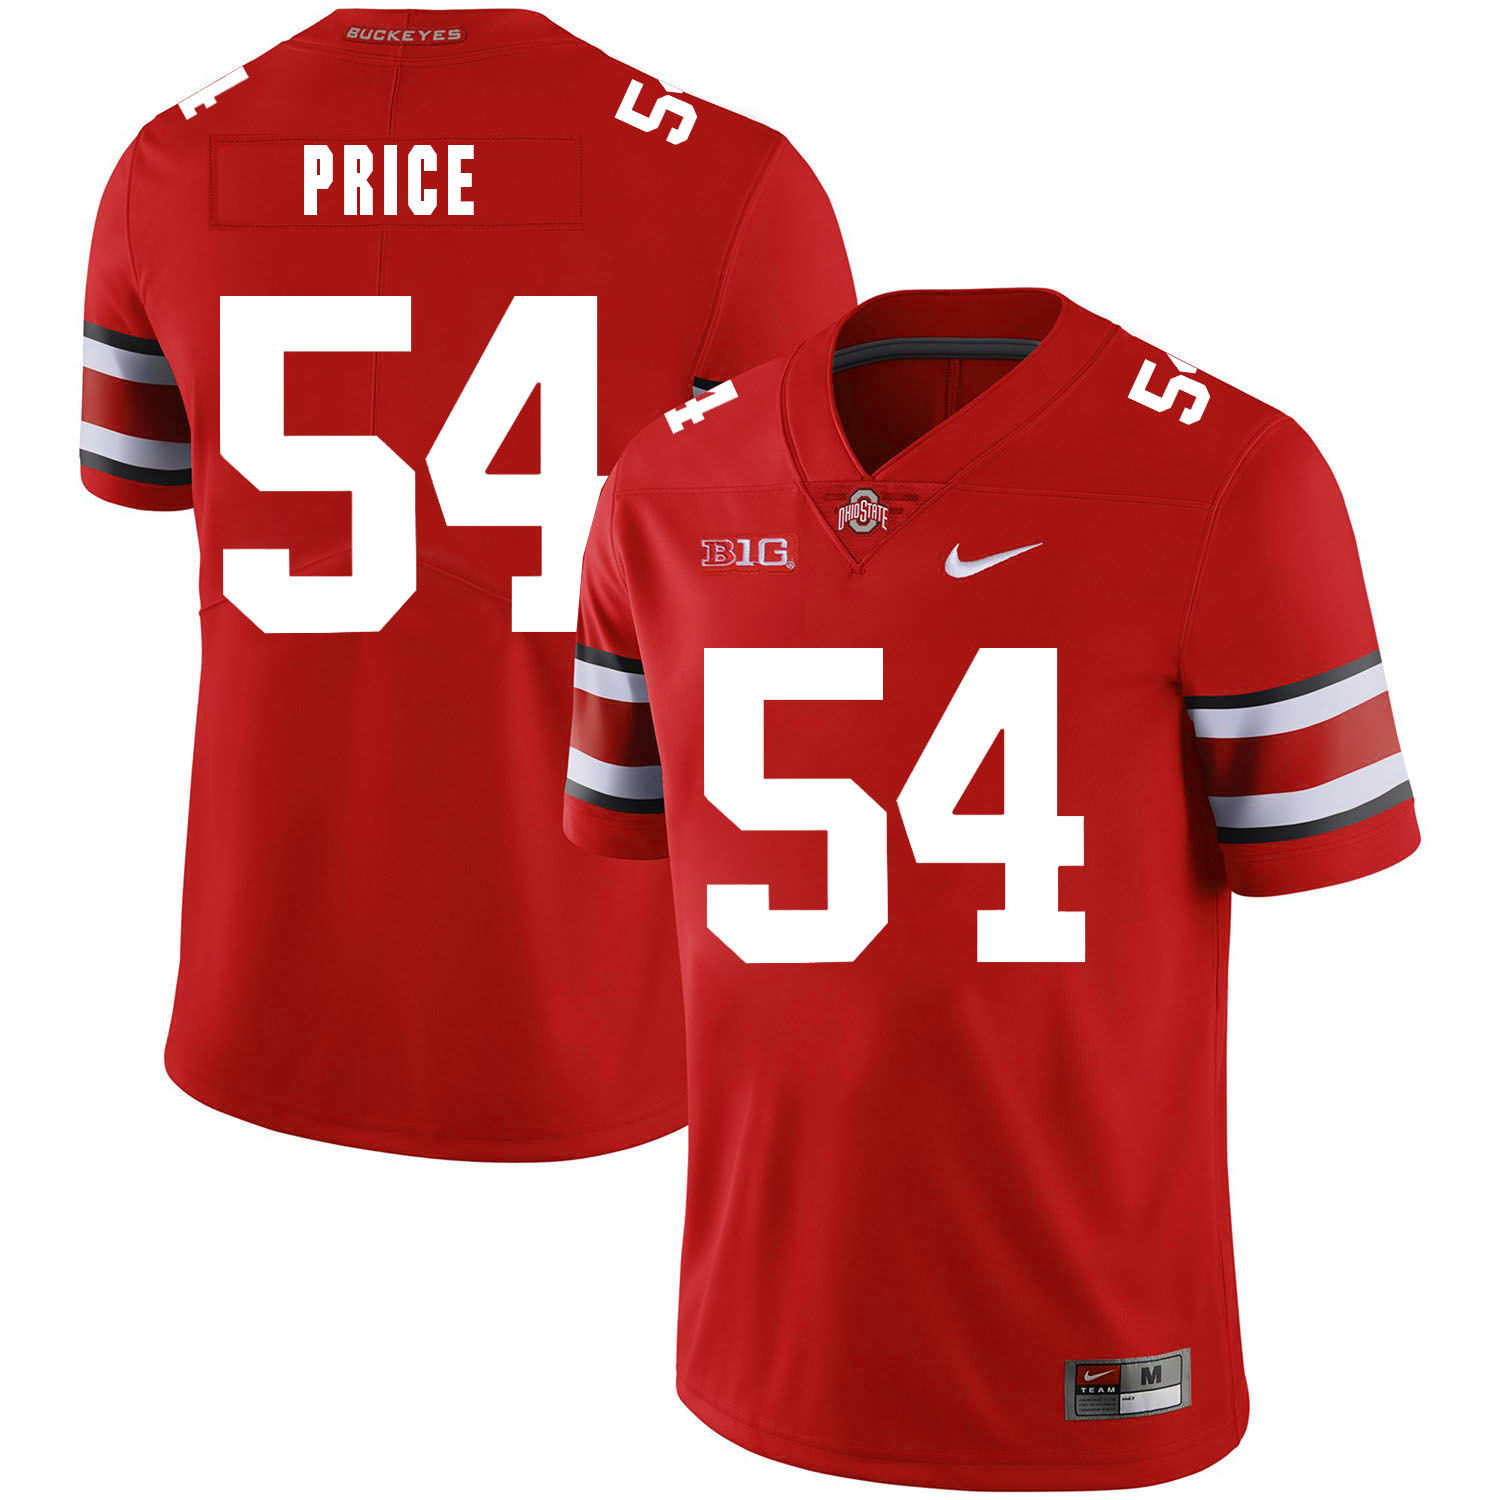 Ohio State Buckeyes 54 Billy Price Red Nike College Football Jersey